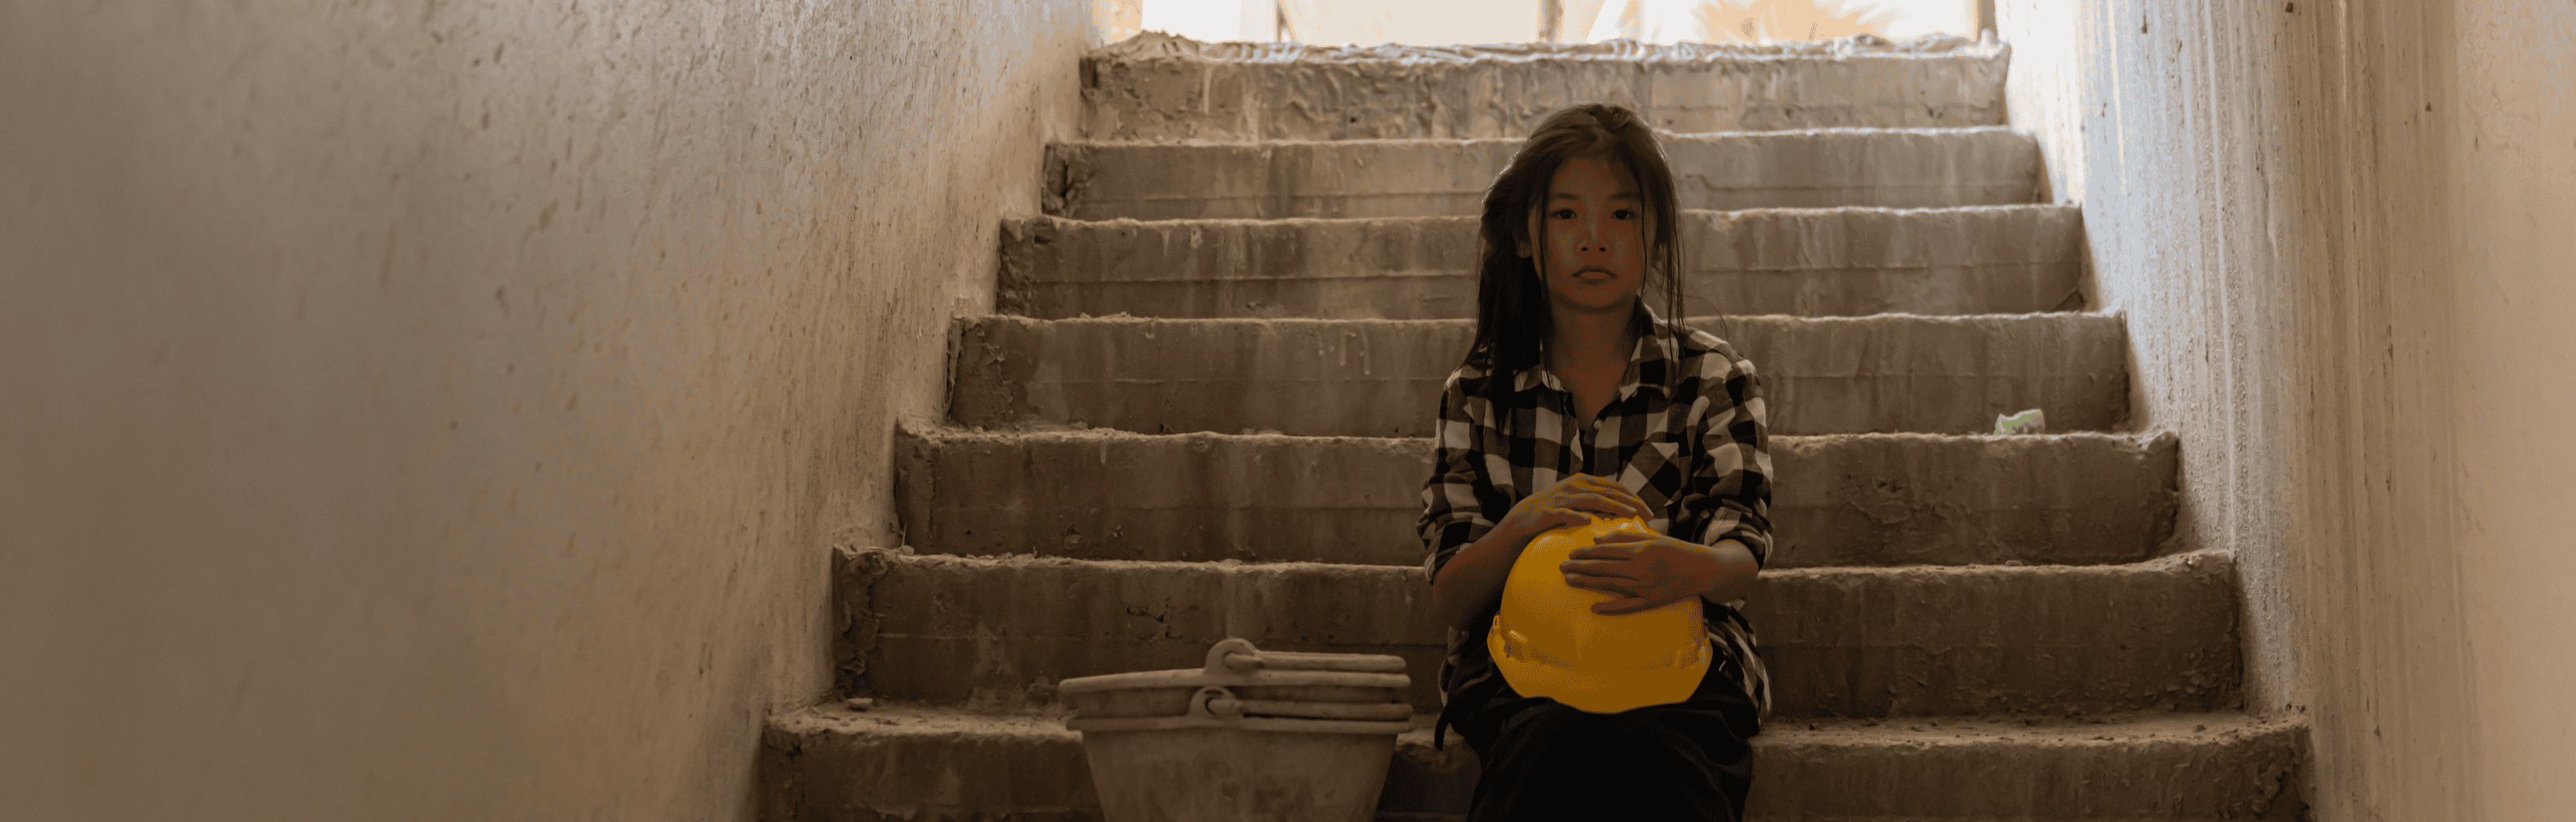 A girl sits on steps holding a construction hat